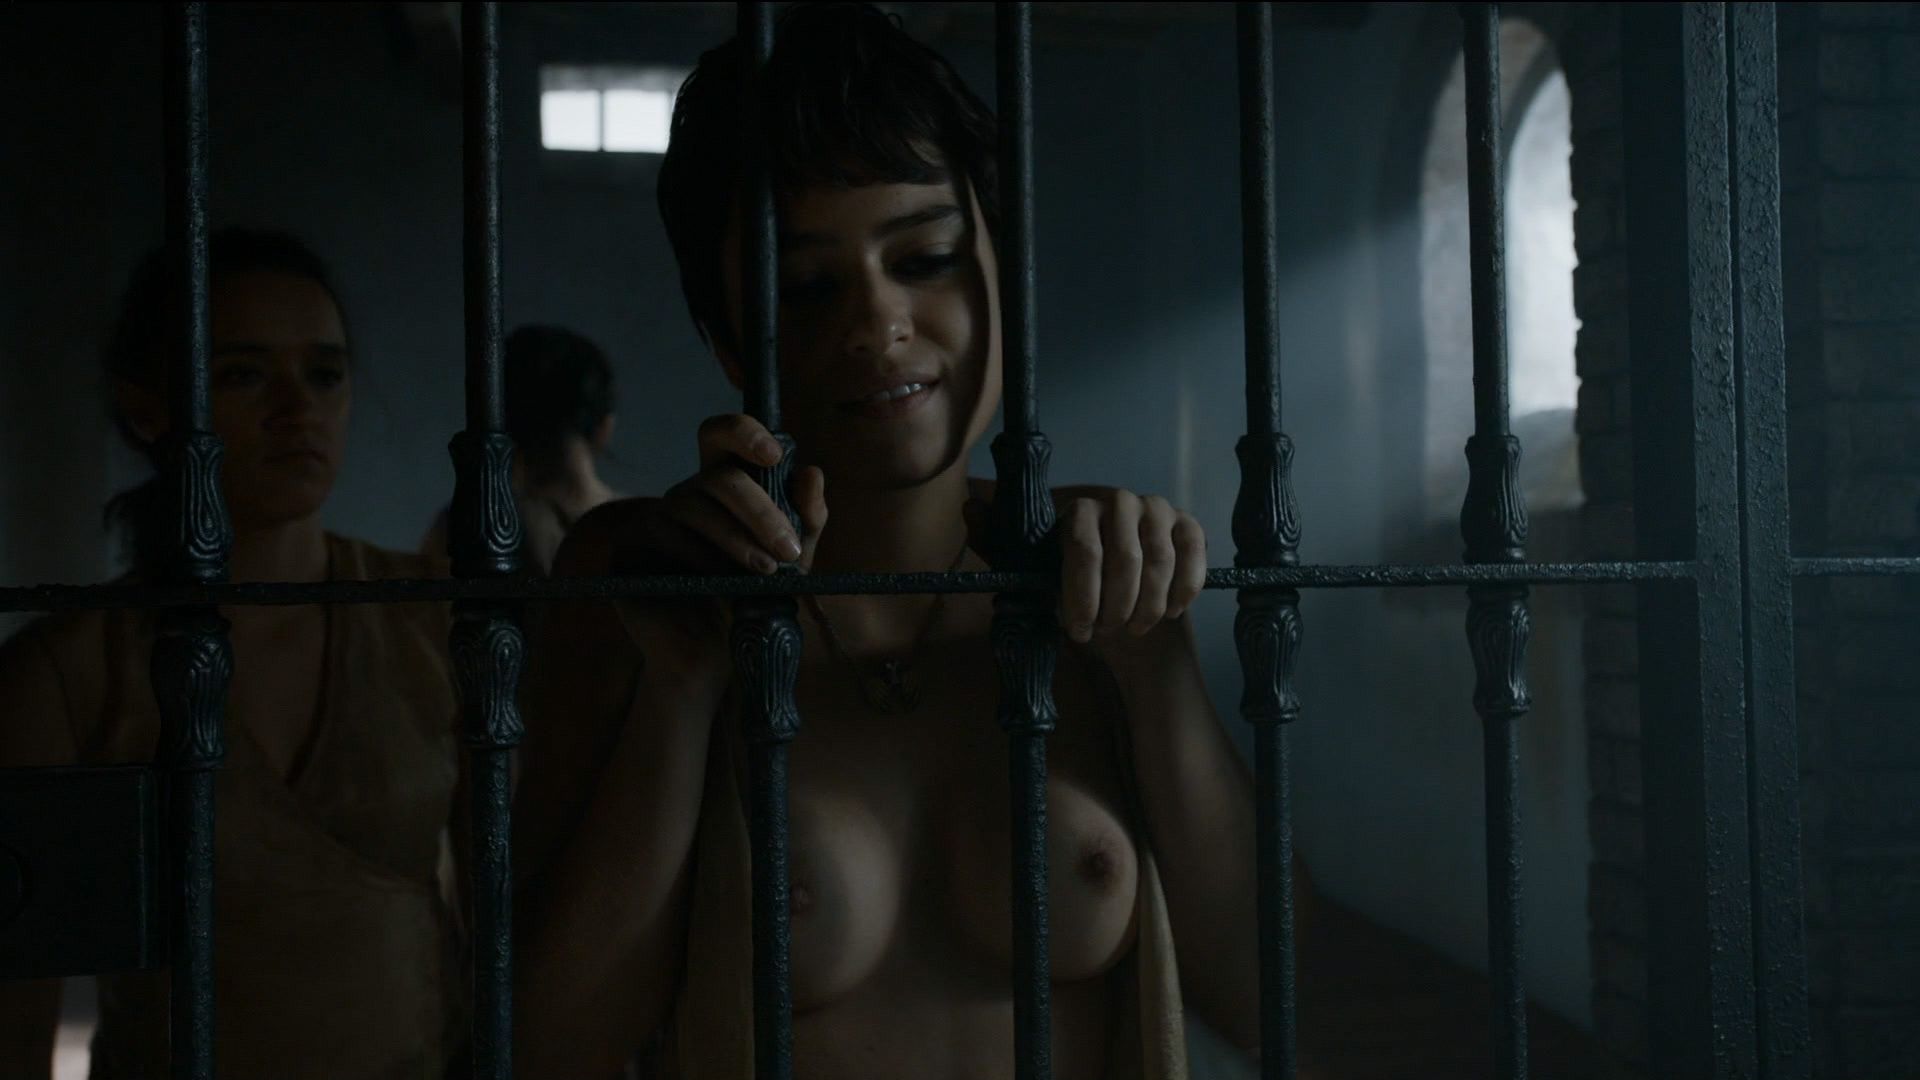 Rosabell laurenti sellers flashing perky boobs